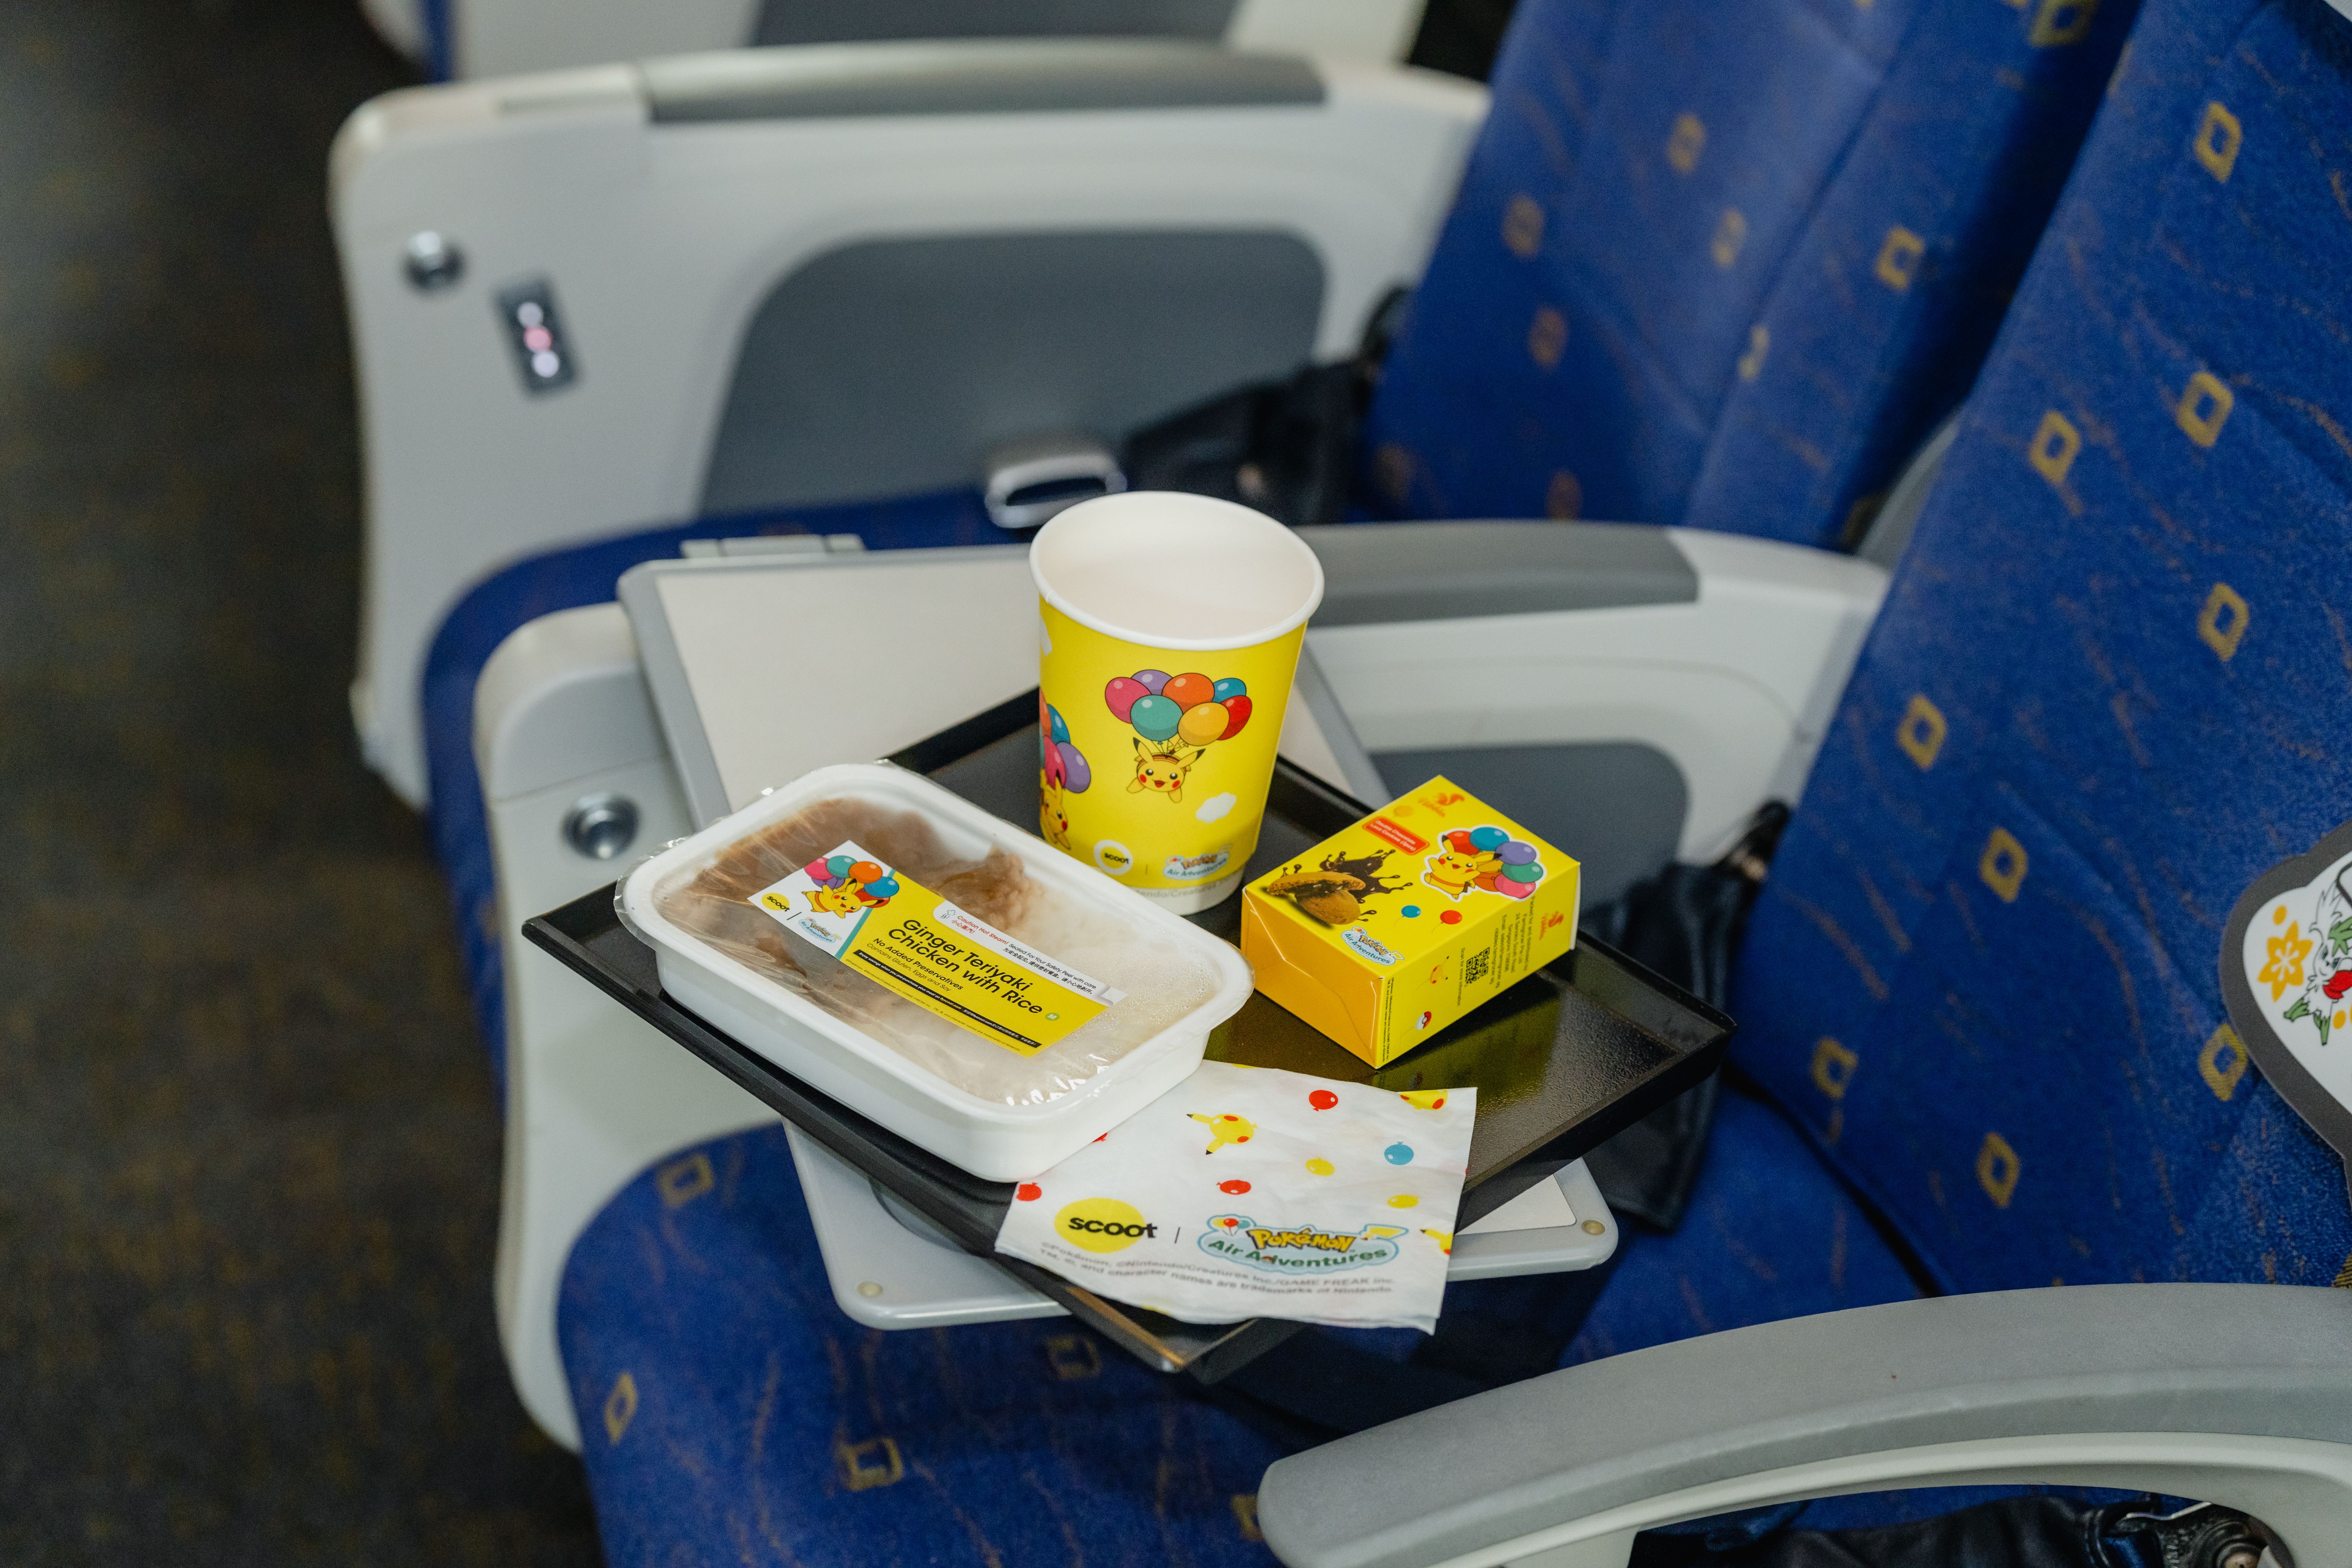 Passengers can look forward to Japanese inspired meals onboard the Pikachu Jet TR